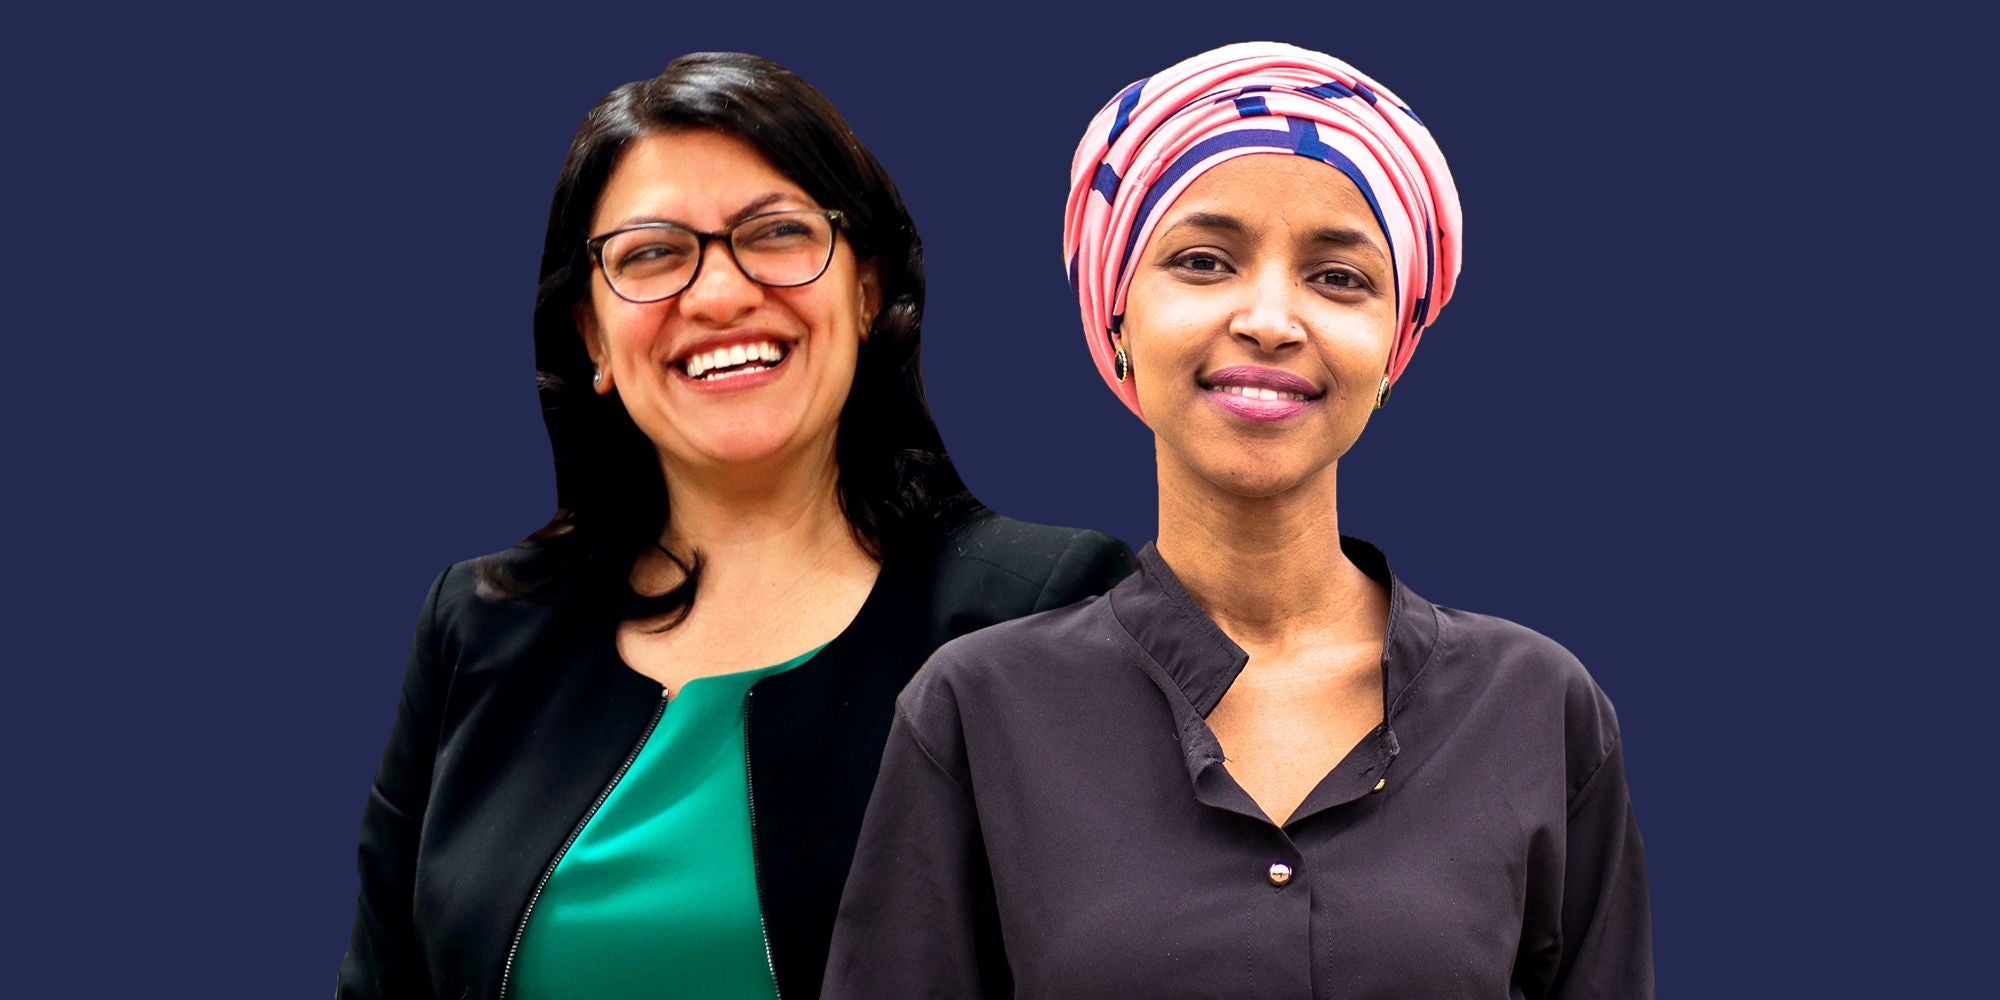 Portraits of Congresswoman Rashida Tlaib & Ilhan Omar with an overlay of blue. Tlaib on the right smiles at the camera, Ilhan on the left looks at the camera dead on